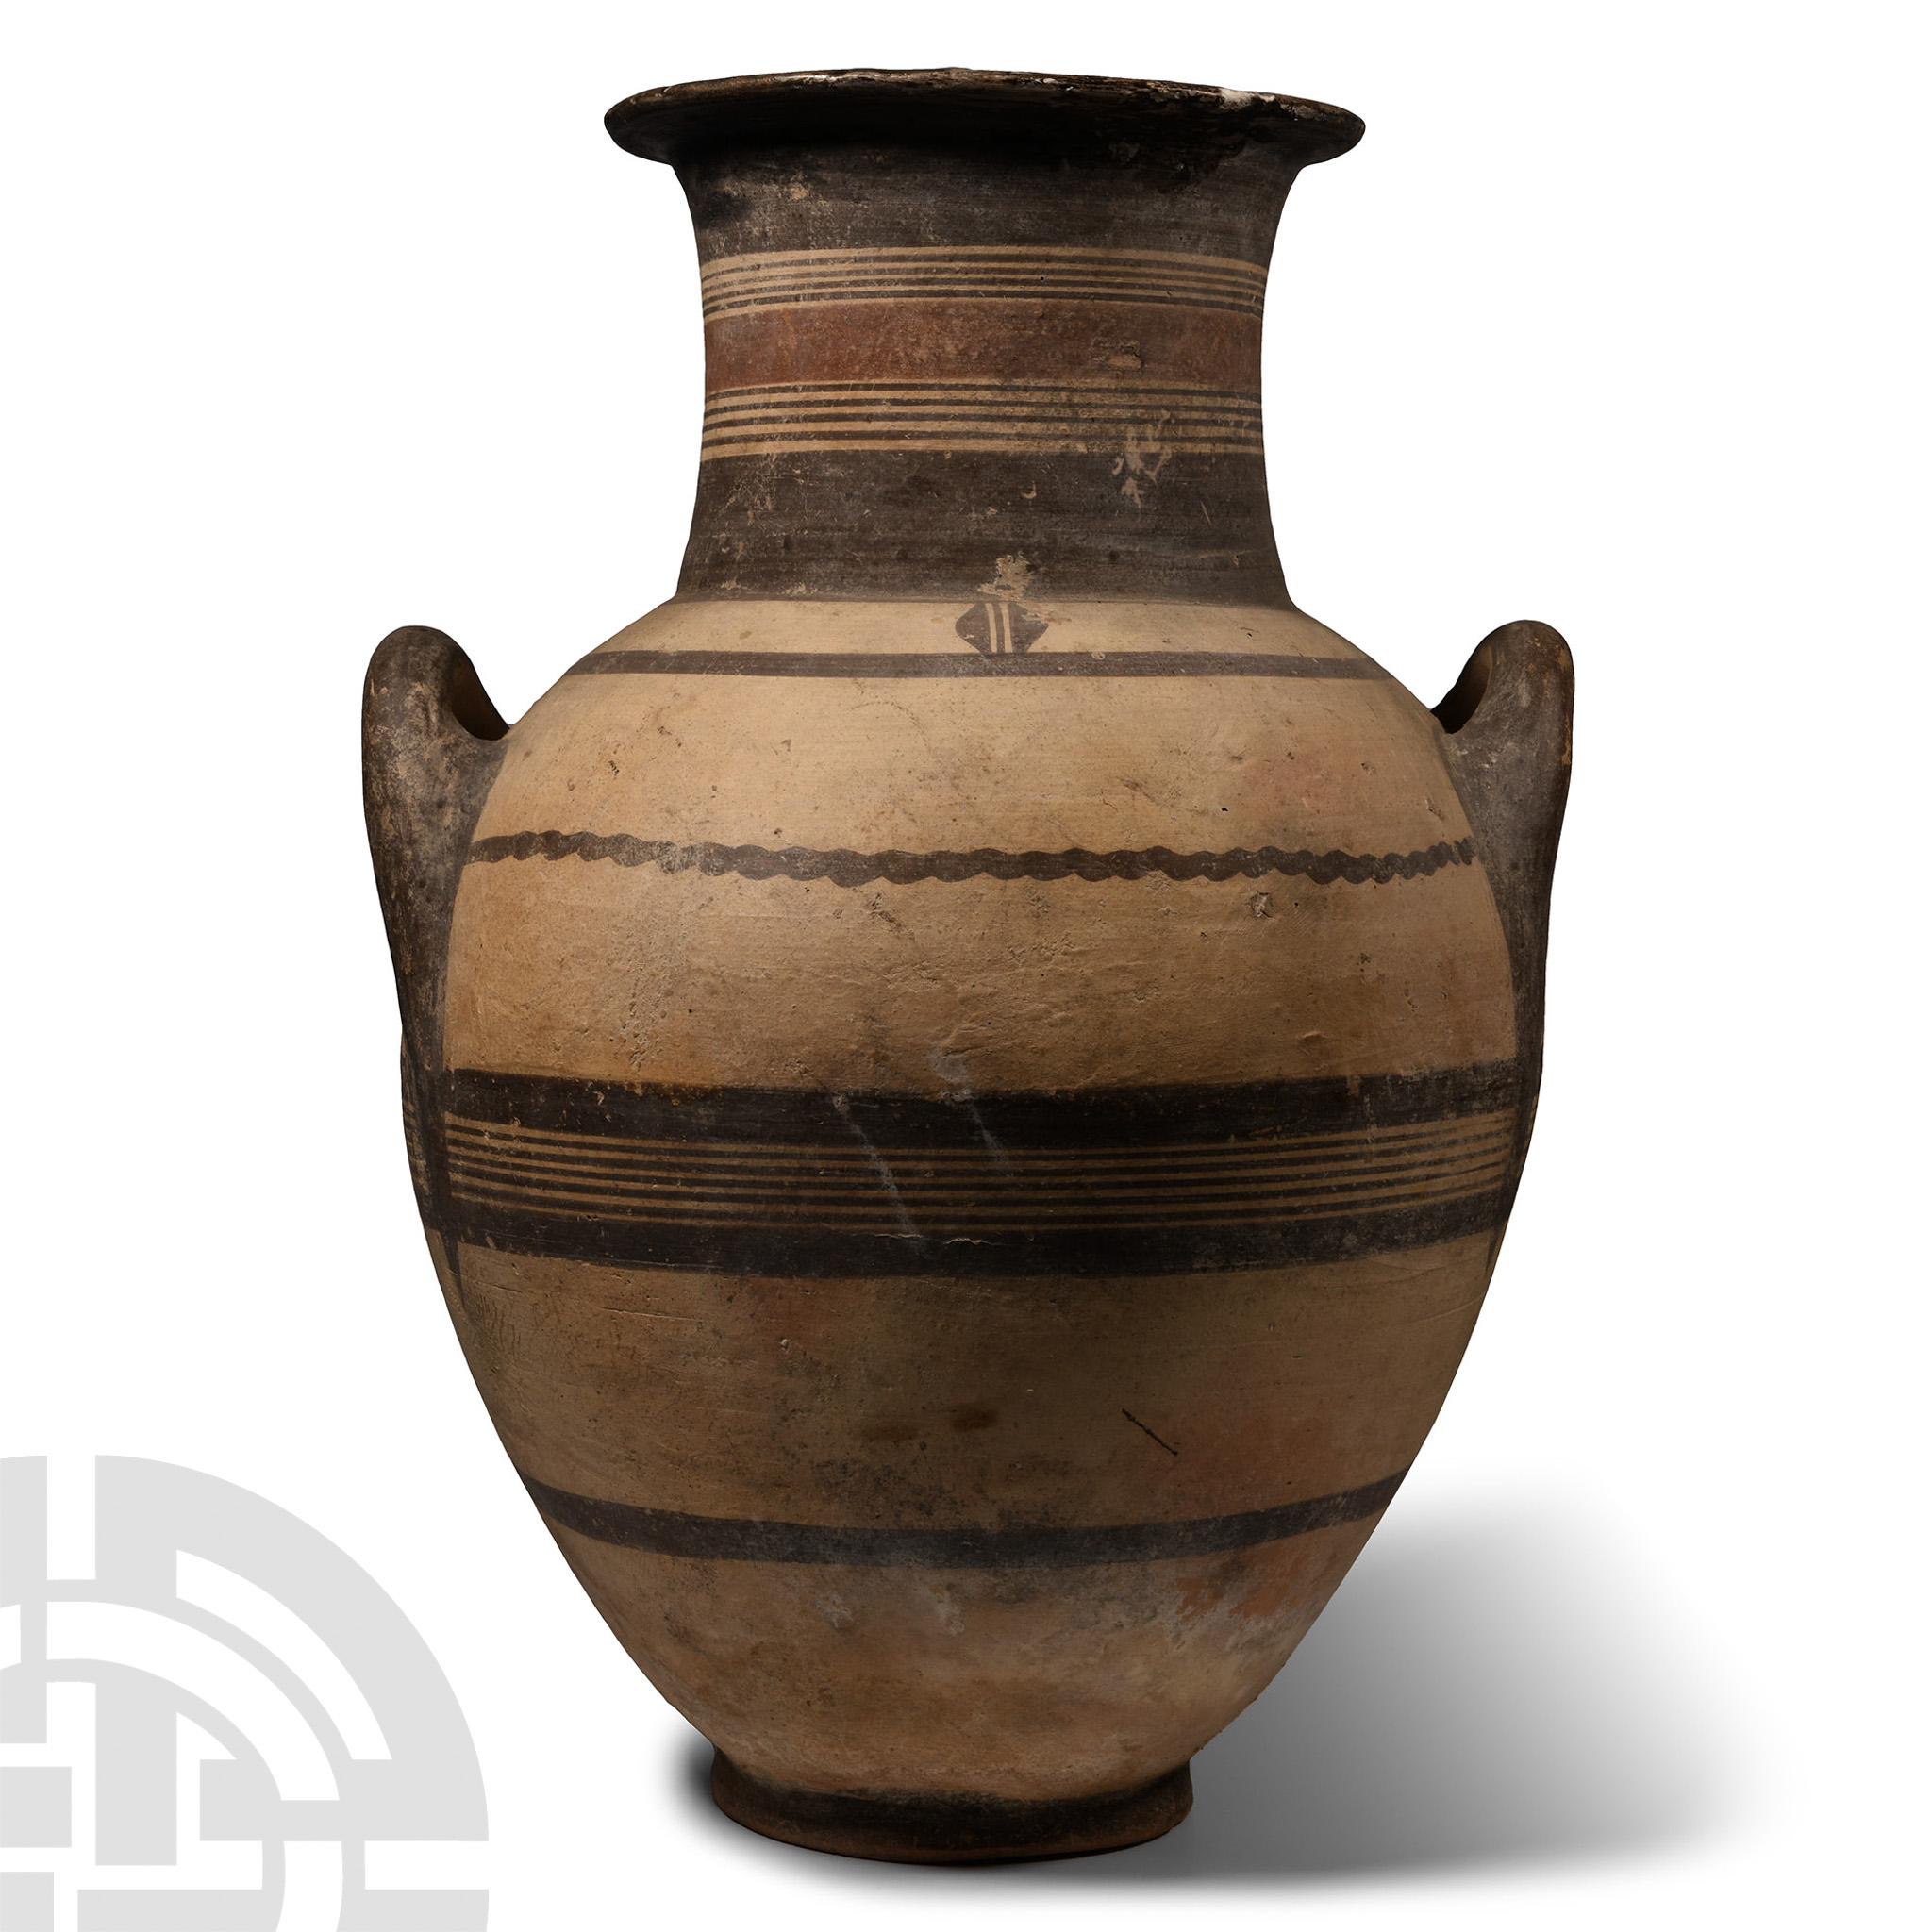 Very Large Cypriot Bichrome Ware Pottery Amphora - Image 4 of 4